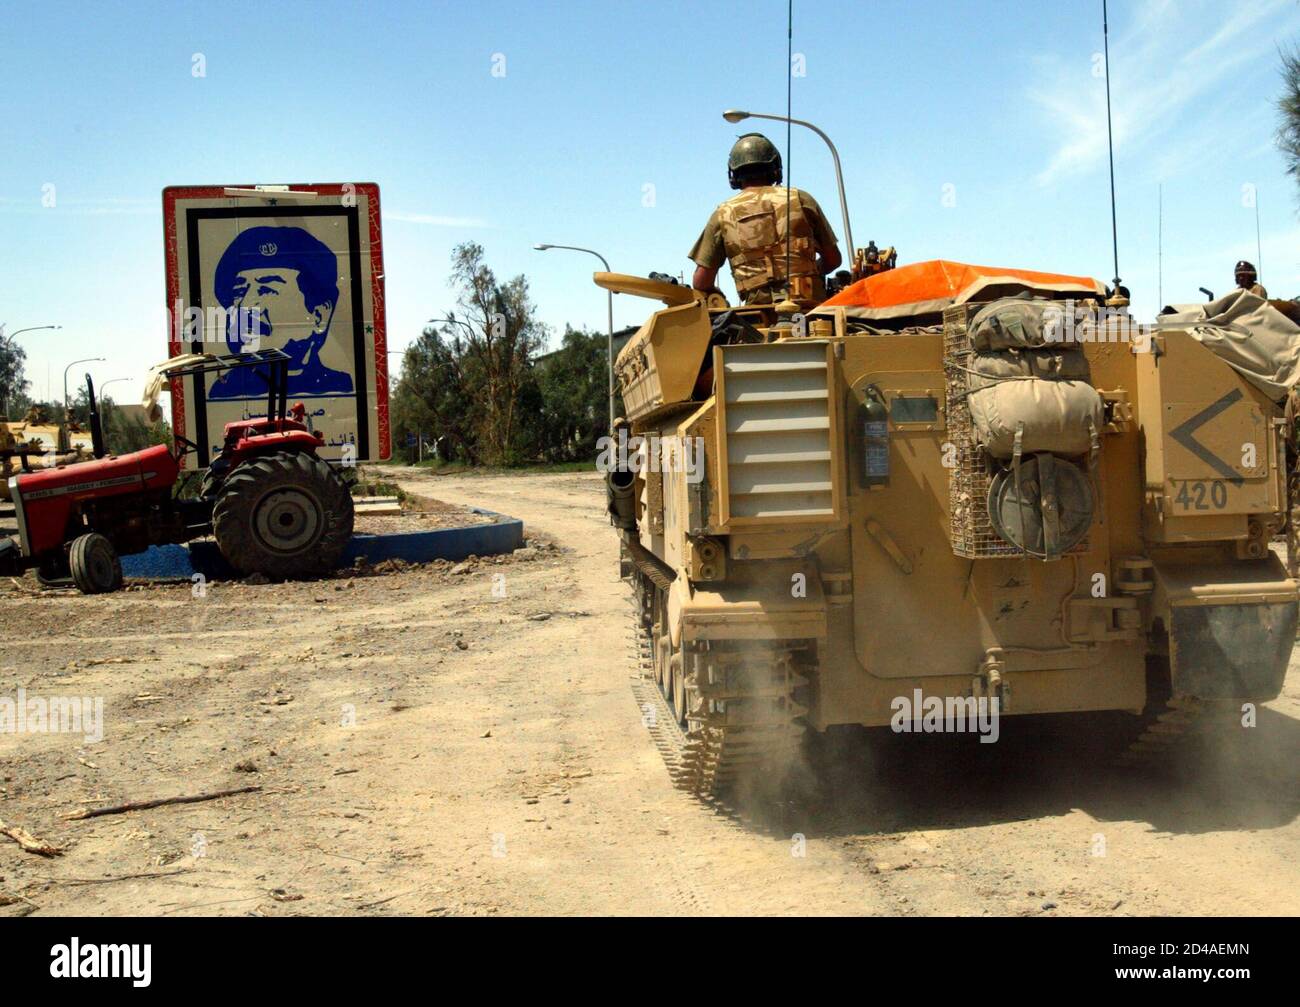 British Light Armored Vehicles (LAV) from the Royal Scots Dragoons Guard move in Basra's industrial estate April, 3, 2003. British forces muscled into the outskirts of Iraq's second city of Basra early on Thursday, capturing an industrial estate where Iraqi militia had spearheaded fierce resistance. Bullet holes pockmarked the walls, burnt-out cars smouldered outside, glass from smashed windows was strewn on the streets and, amid the destruction, a large, colorful Andy Warhol-style picture of Saddam still stands. REUTERS/Yannis Behrakis  YB/WS Stock Photo